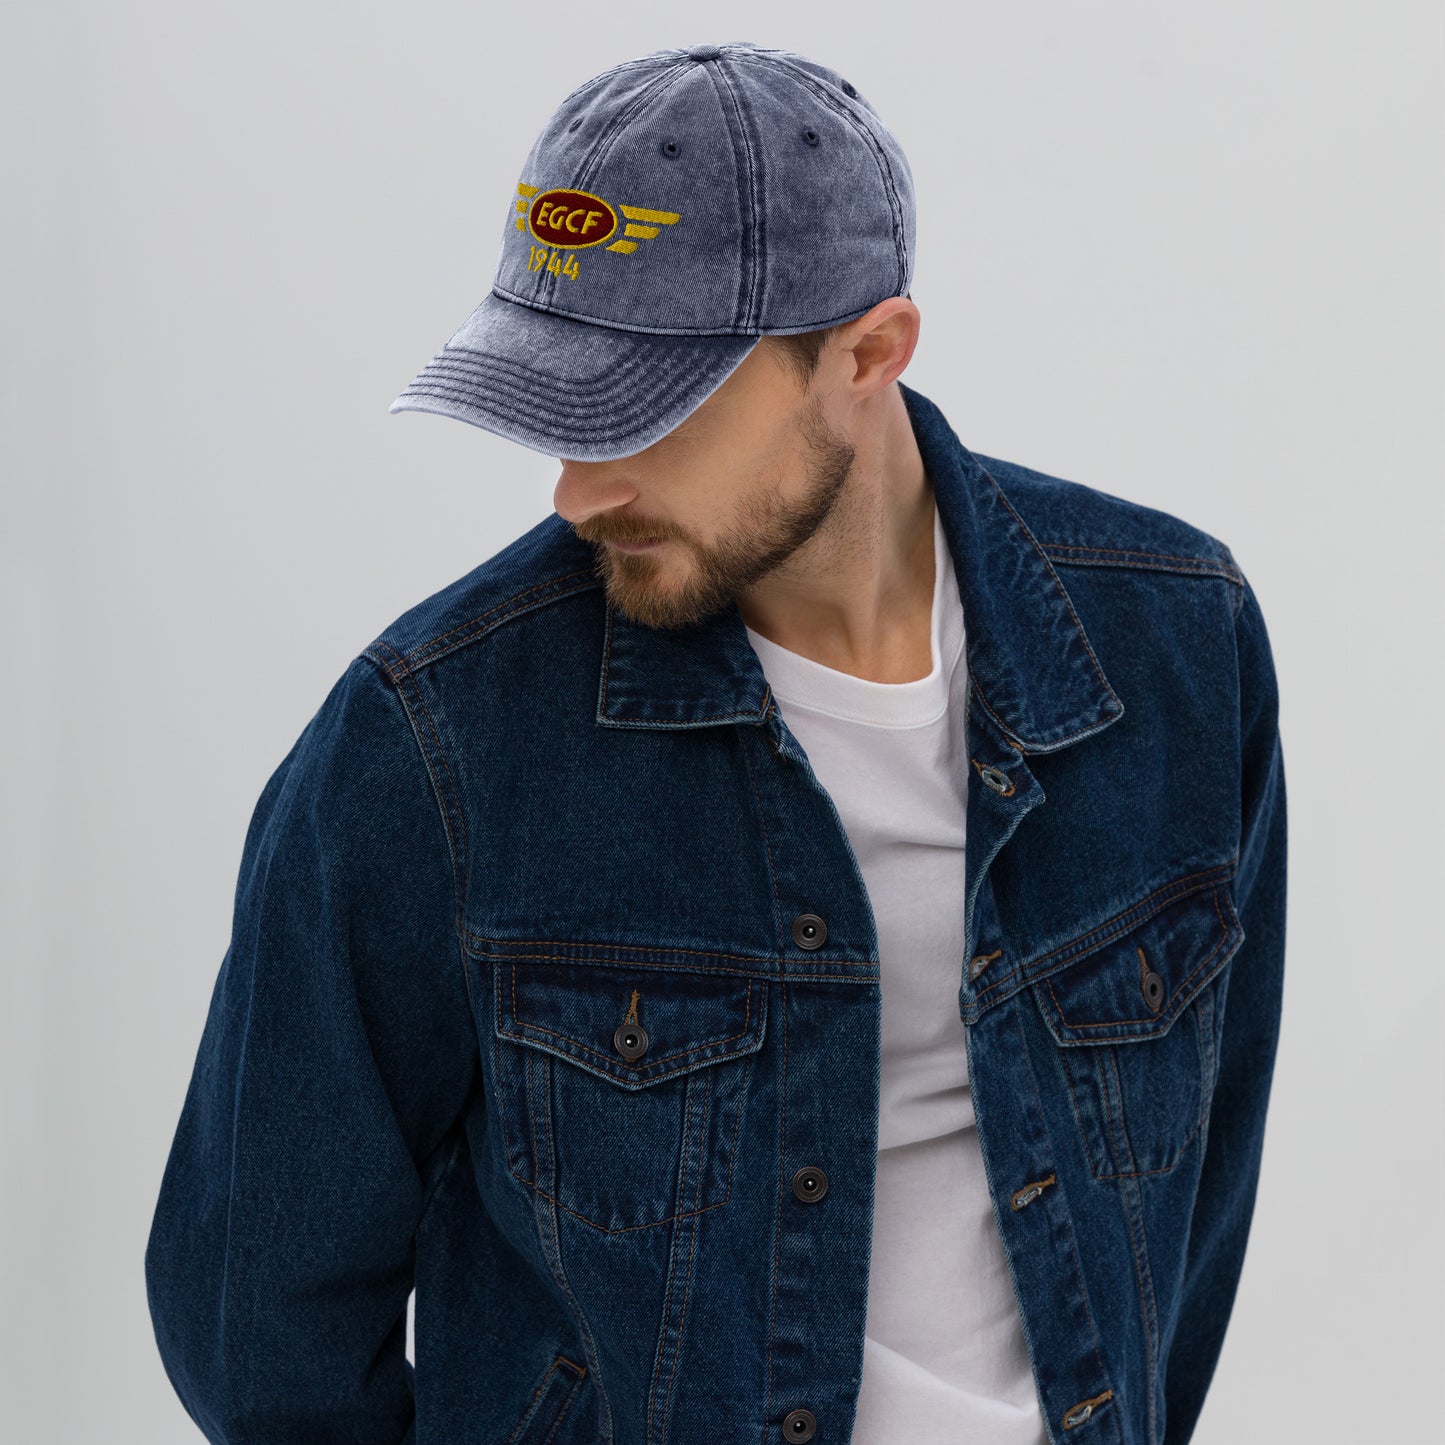 Sandtoft Airfield vintage cotton twill baseball cap with embroidered ICAO code.